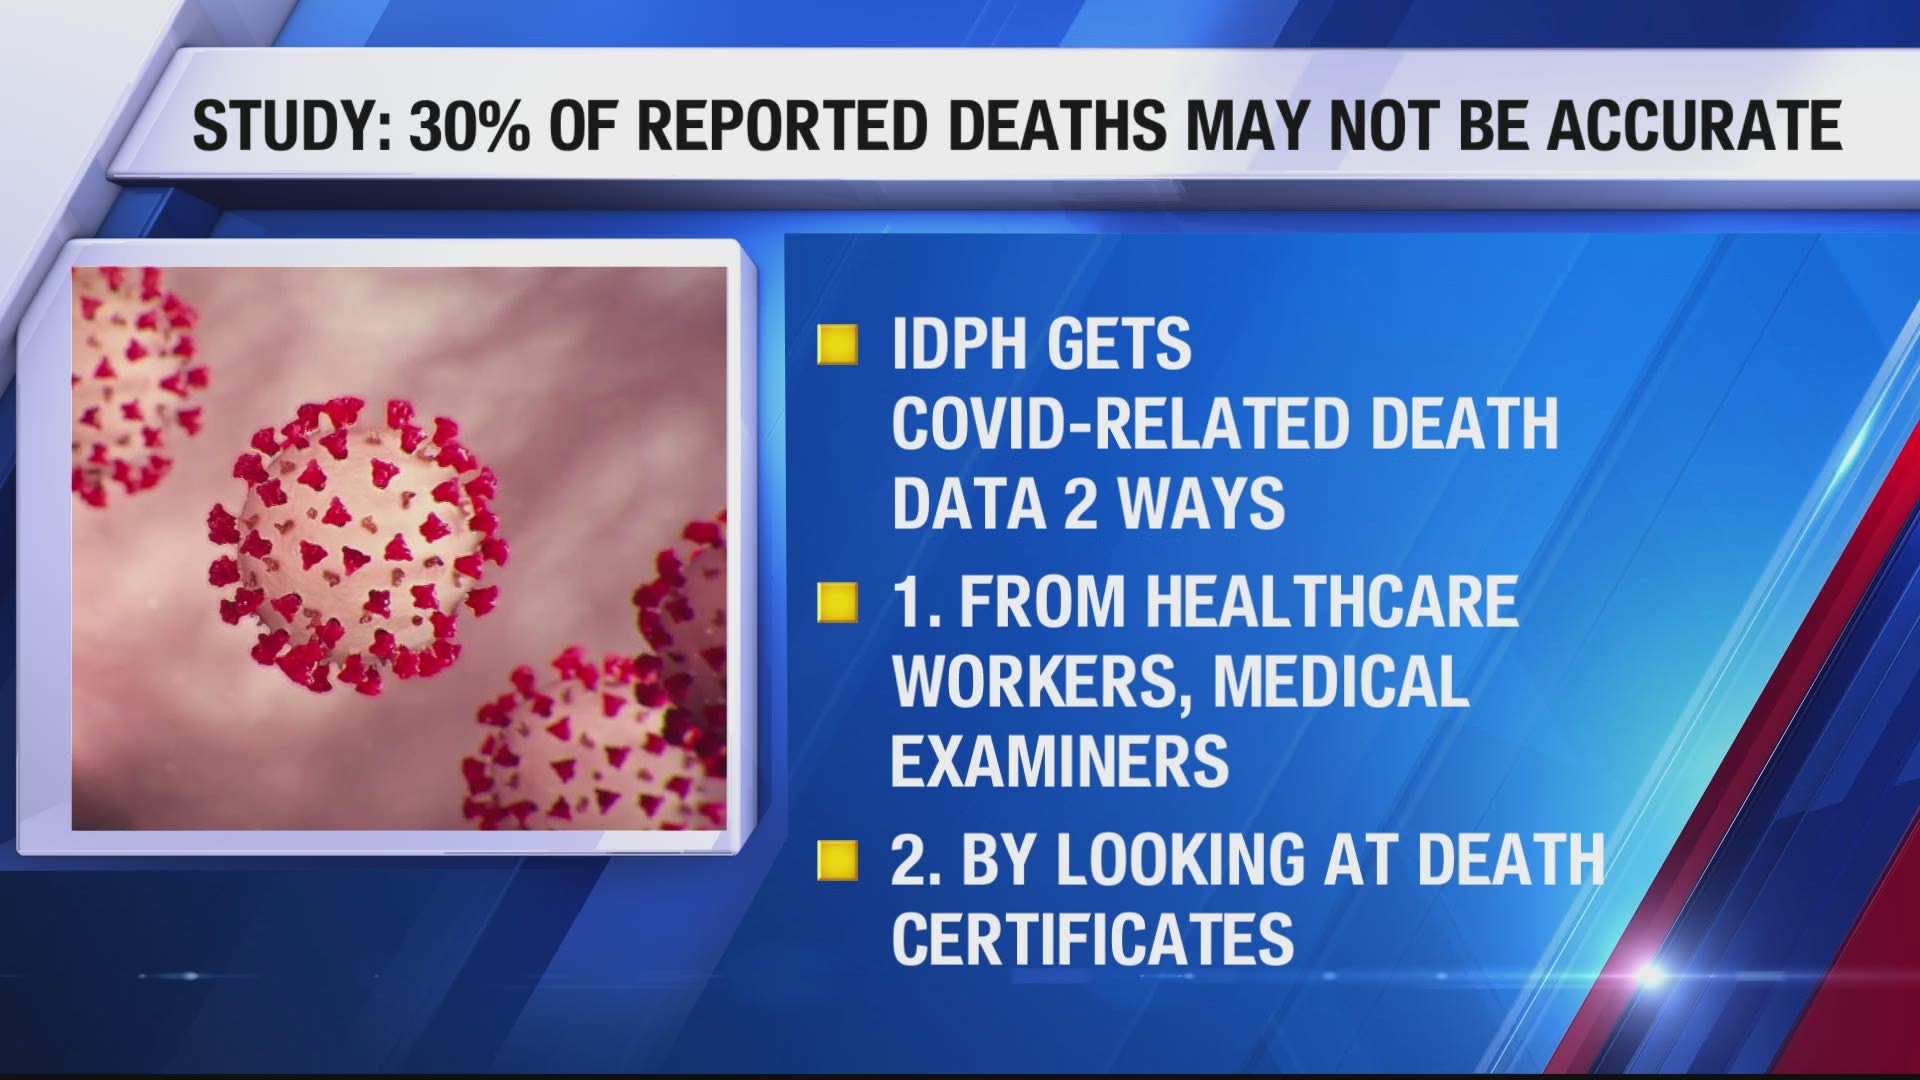 IDPH gets death data in two ways: from health care workers or medical examiners, and by looking at death certificates.